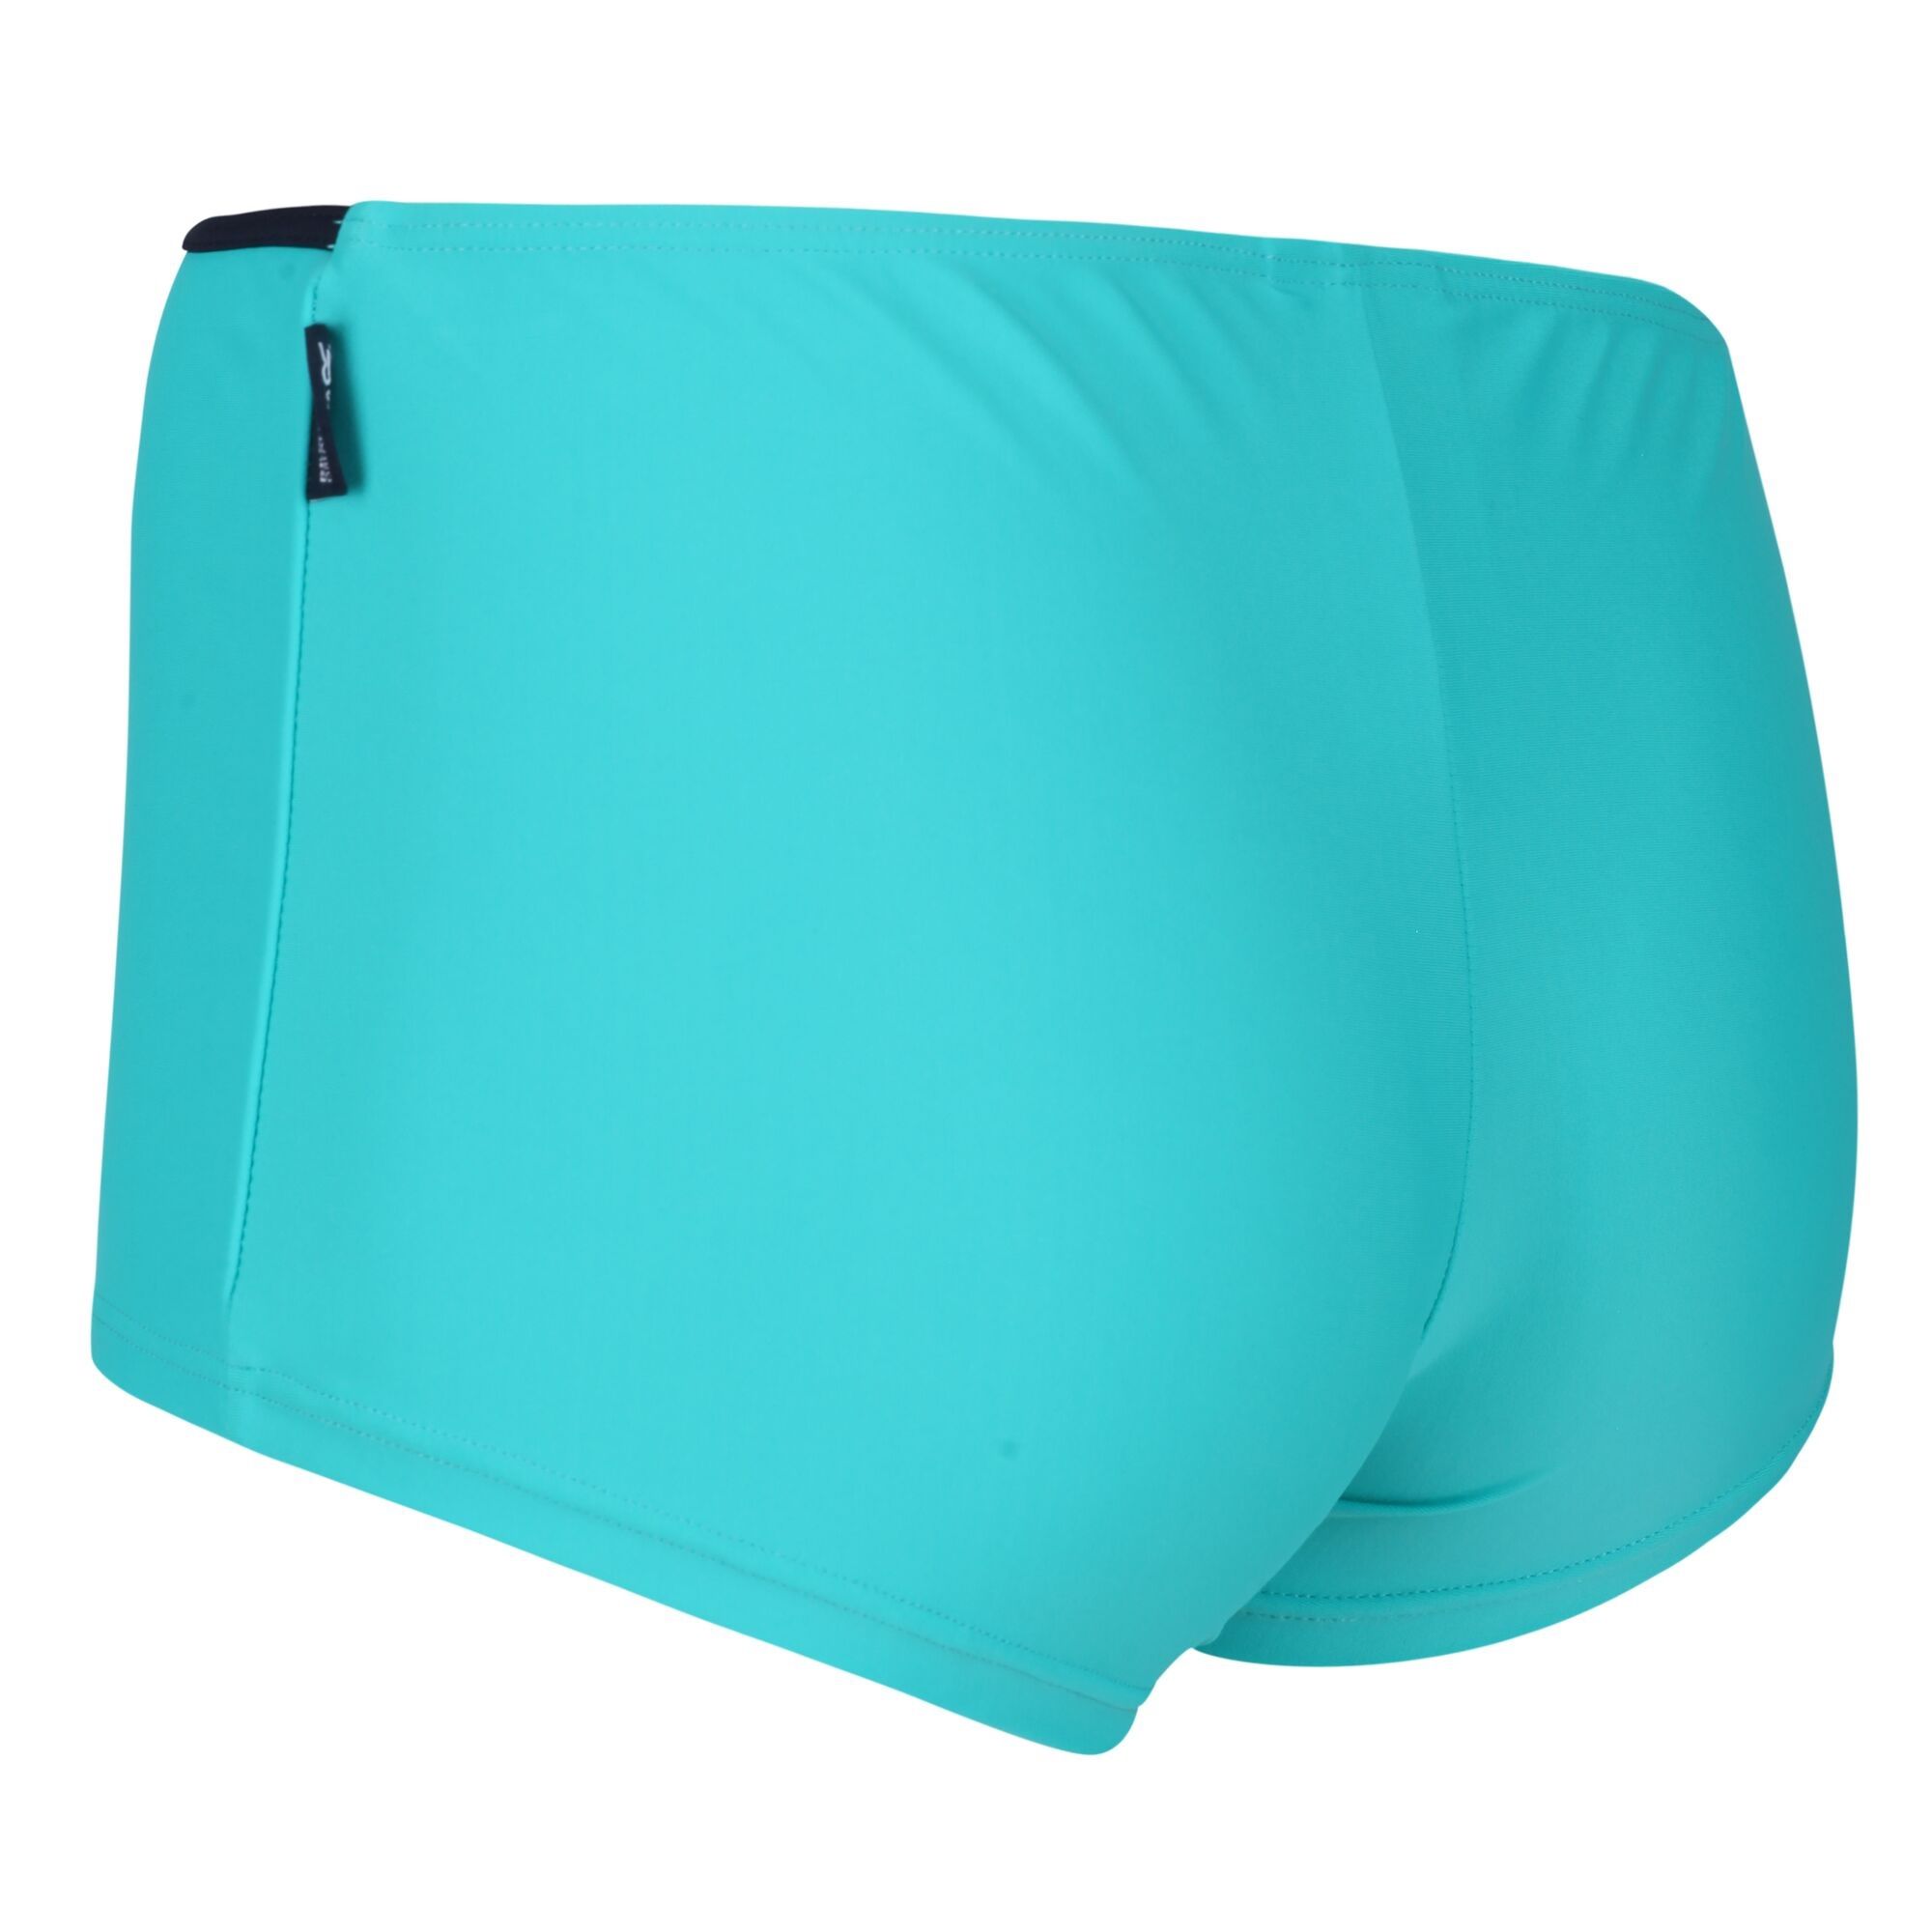 80% polyamide, 20% elastane. Mix and match your favourite styles from the Regatta Aceana Collection to create your perfect two-piece swimsuit. The Aceana Bikini Shorts are made of soft-touch stretch fabric cut to sit above the hip and cover the bottom. With a slim contrast colour band around the waist and small Regatta tab on the left hip. Regatta Womens sizing (waist approx): 6 (23in/58cm), 8 (25in/63cm), 10 (27in/68cm), 12 (29in/74cm), 14 (31in/79cm), 16 (33in/84cm), 18 (36in/91cm), 20 (38in/96cm), 22 (41in/104cm), 24 (43in/109cm), 26 (45in/114cm), 28 (47in/119cm), 30 (49in/124cm), 32 (51in/129cm), 34 (53in/135cm), 36 (55in/140cm).